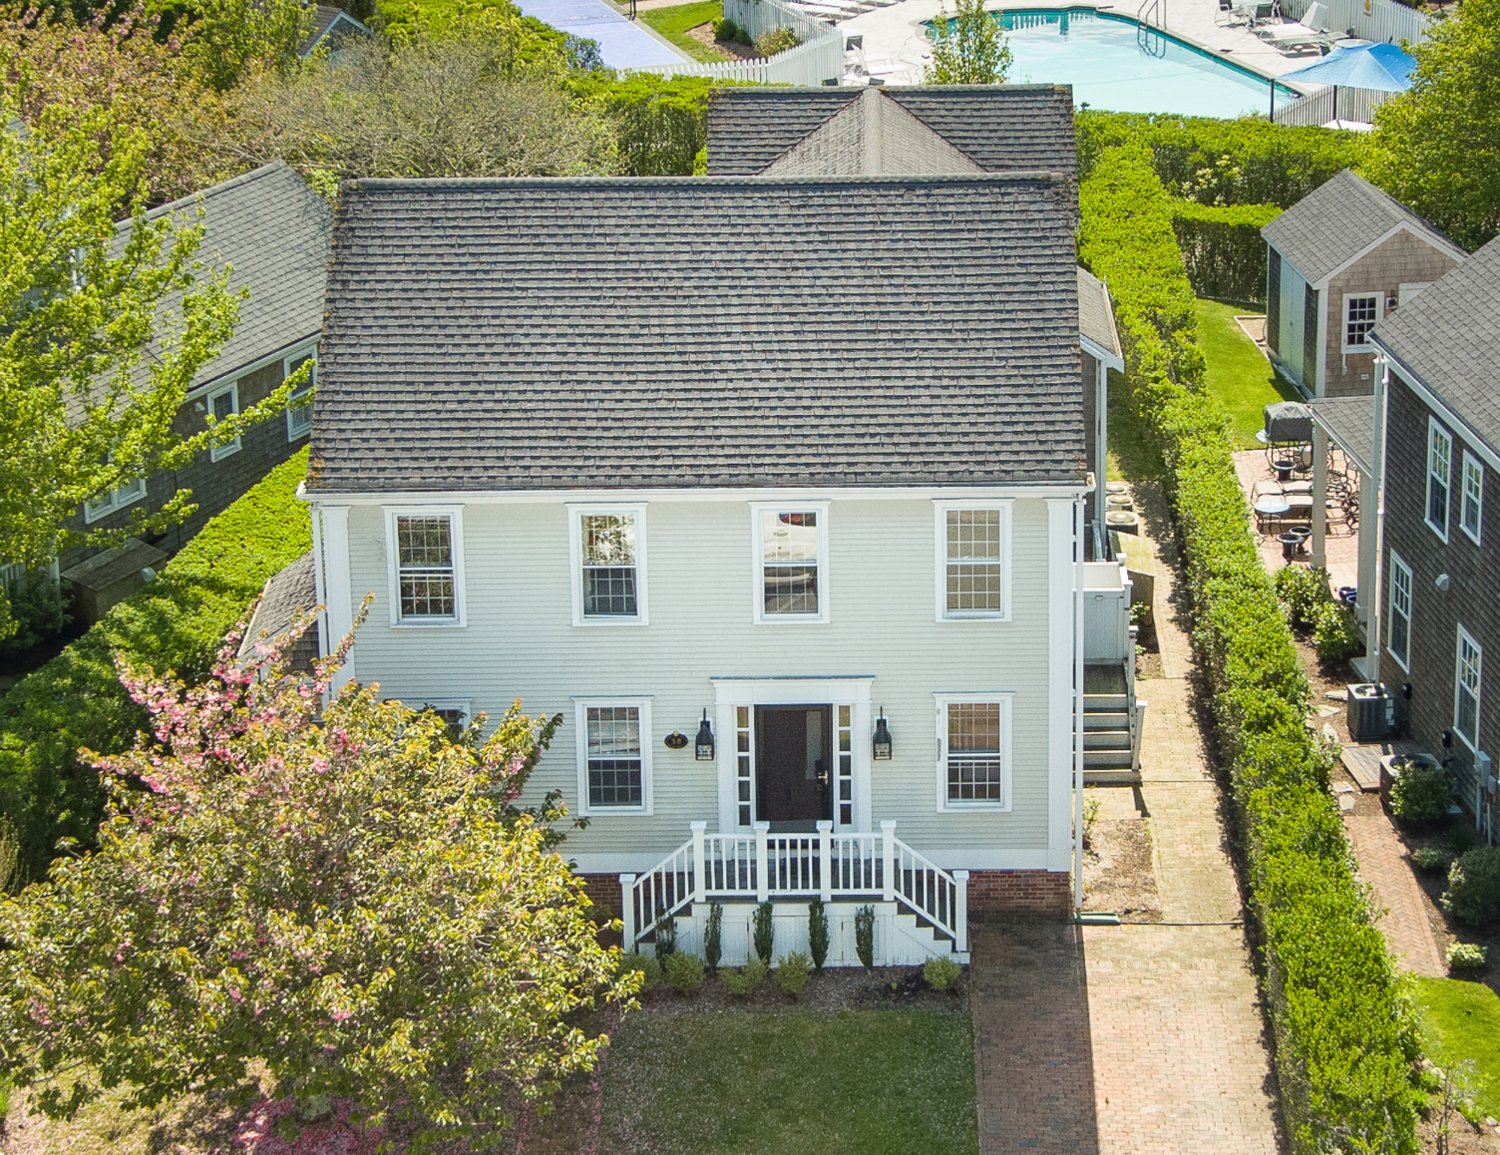 This five-bedroom, three-and-a-half bedroom home is located in one of the island’s most family-friendly neighborhoods.